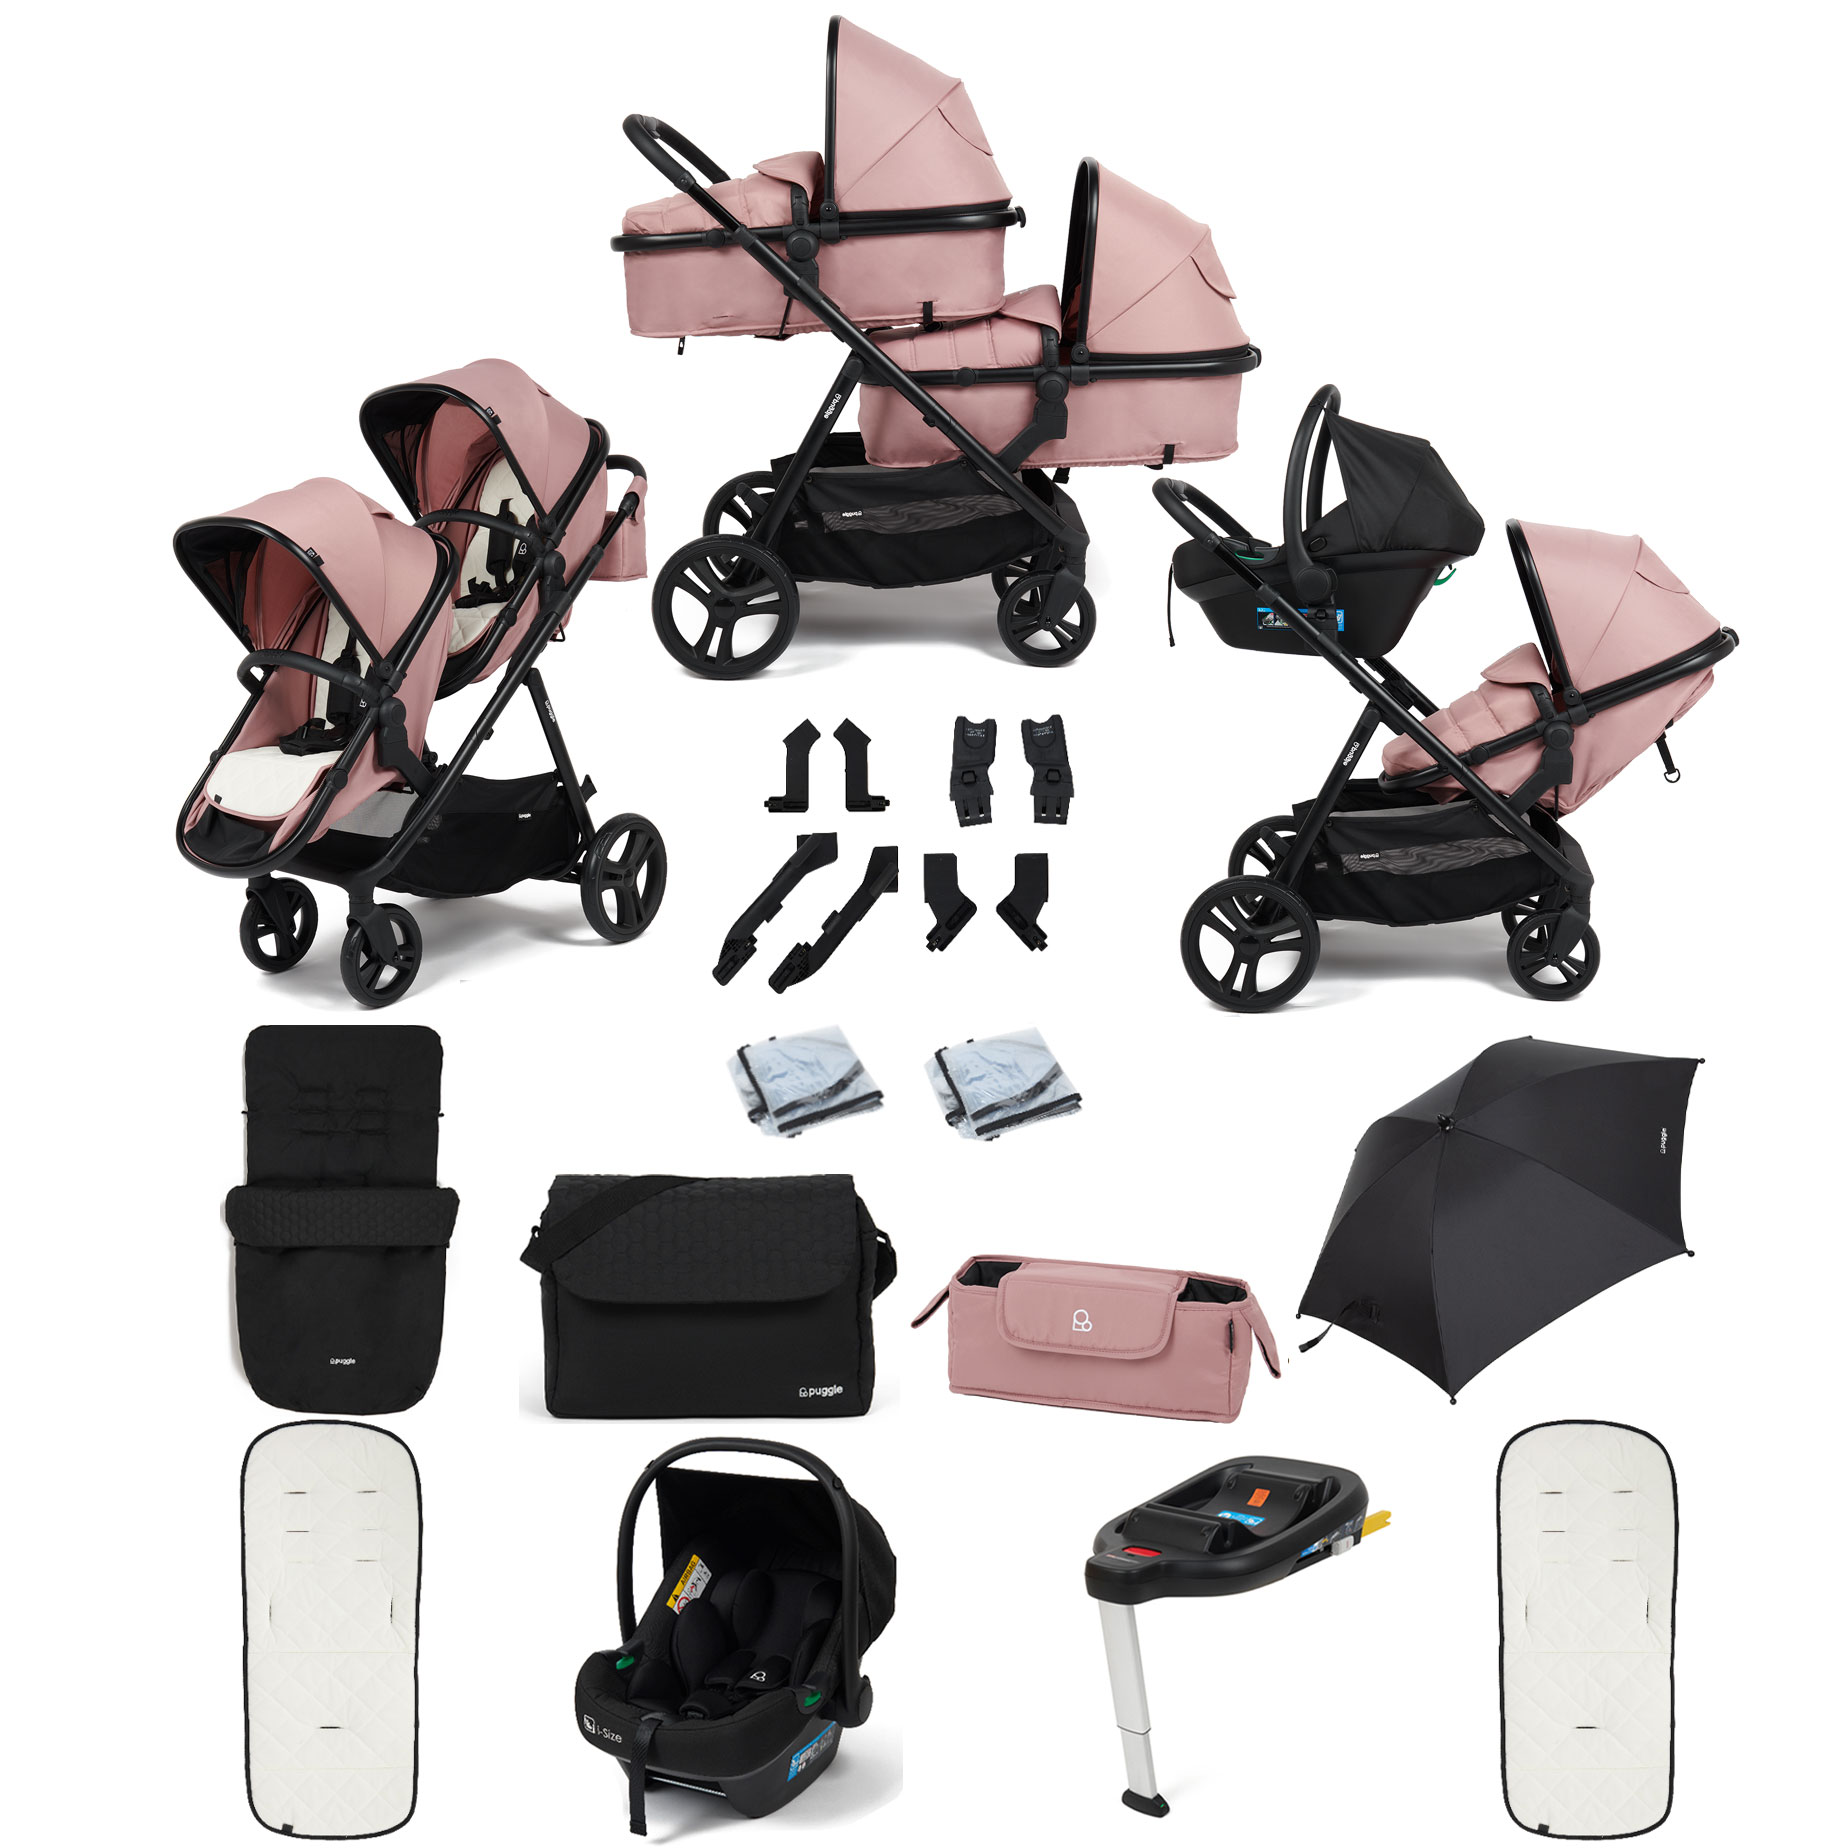 Puggle Memphis 2-in-1 Duo i-Size Double Travel System with Footmuff, Changing Bag, Parasol & i-Size Car Seat with Base - Dusk Pink